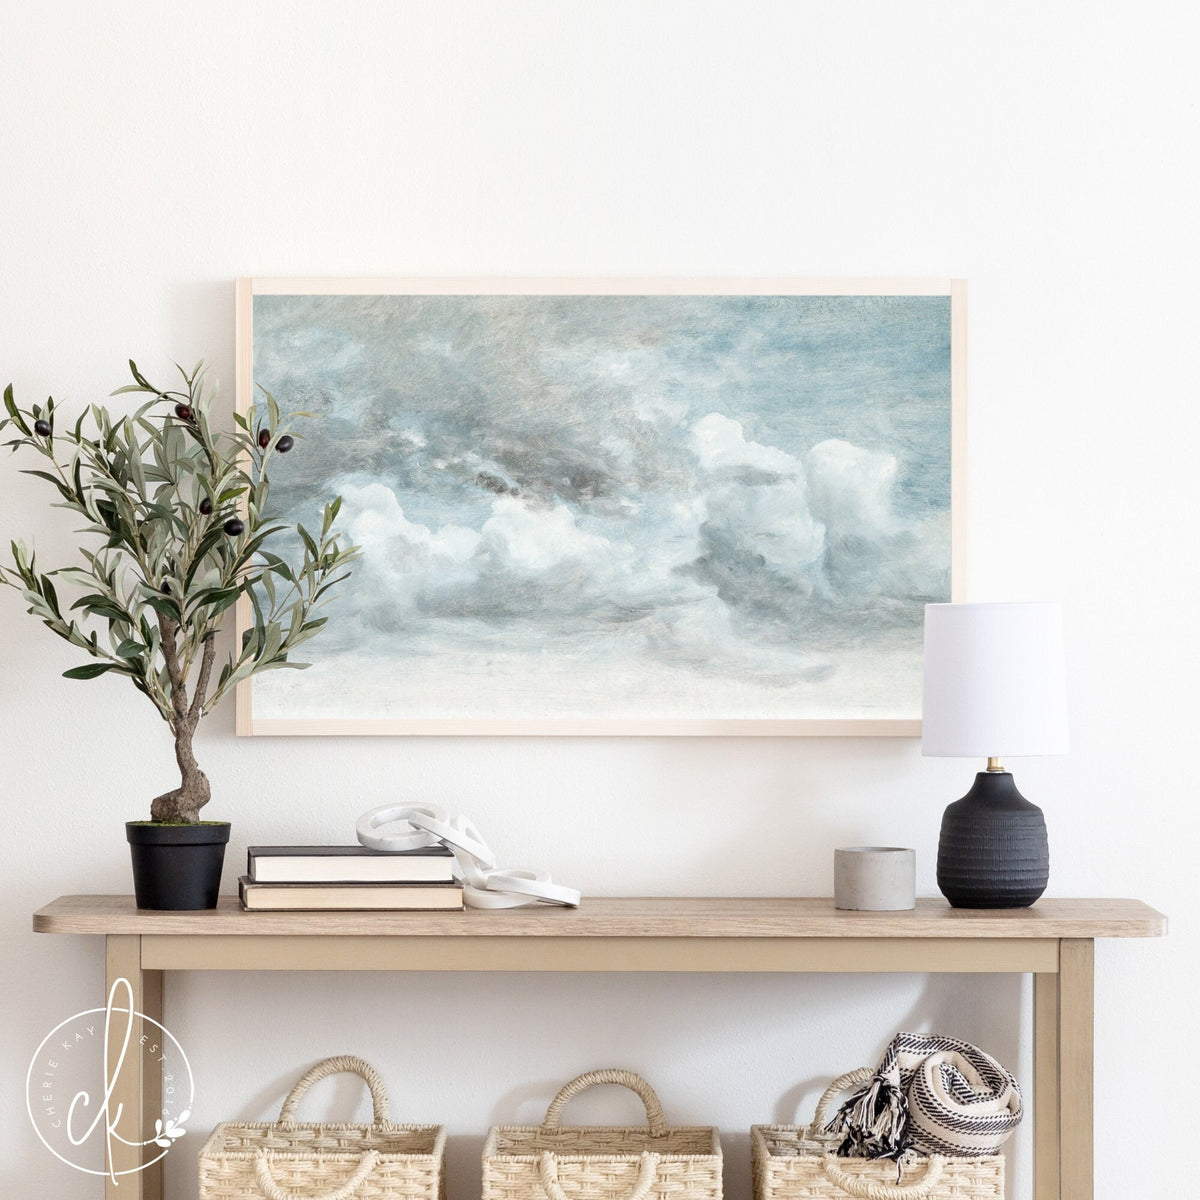 Clouds Painting | Puffy Clouds Painting | Framed Wall Art | Entryway Wall Decor | Living Room Art | Stormy Clouds Painting | Lionel Constable